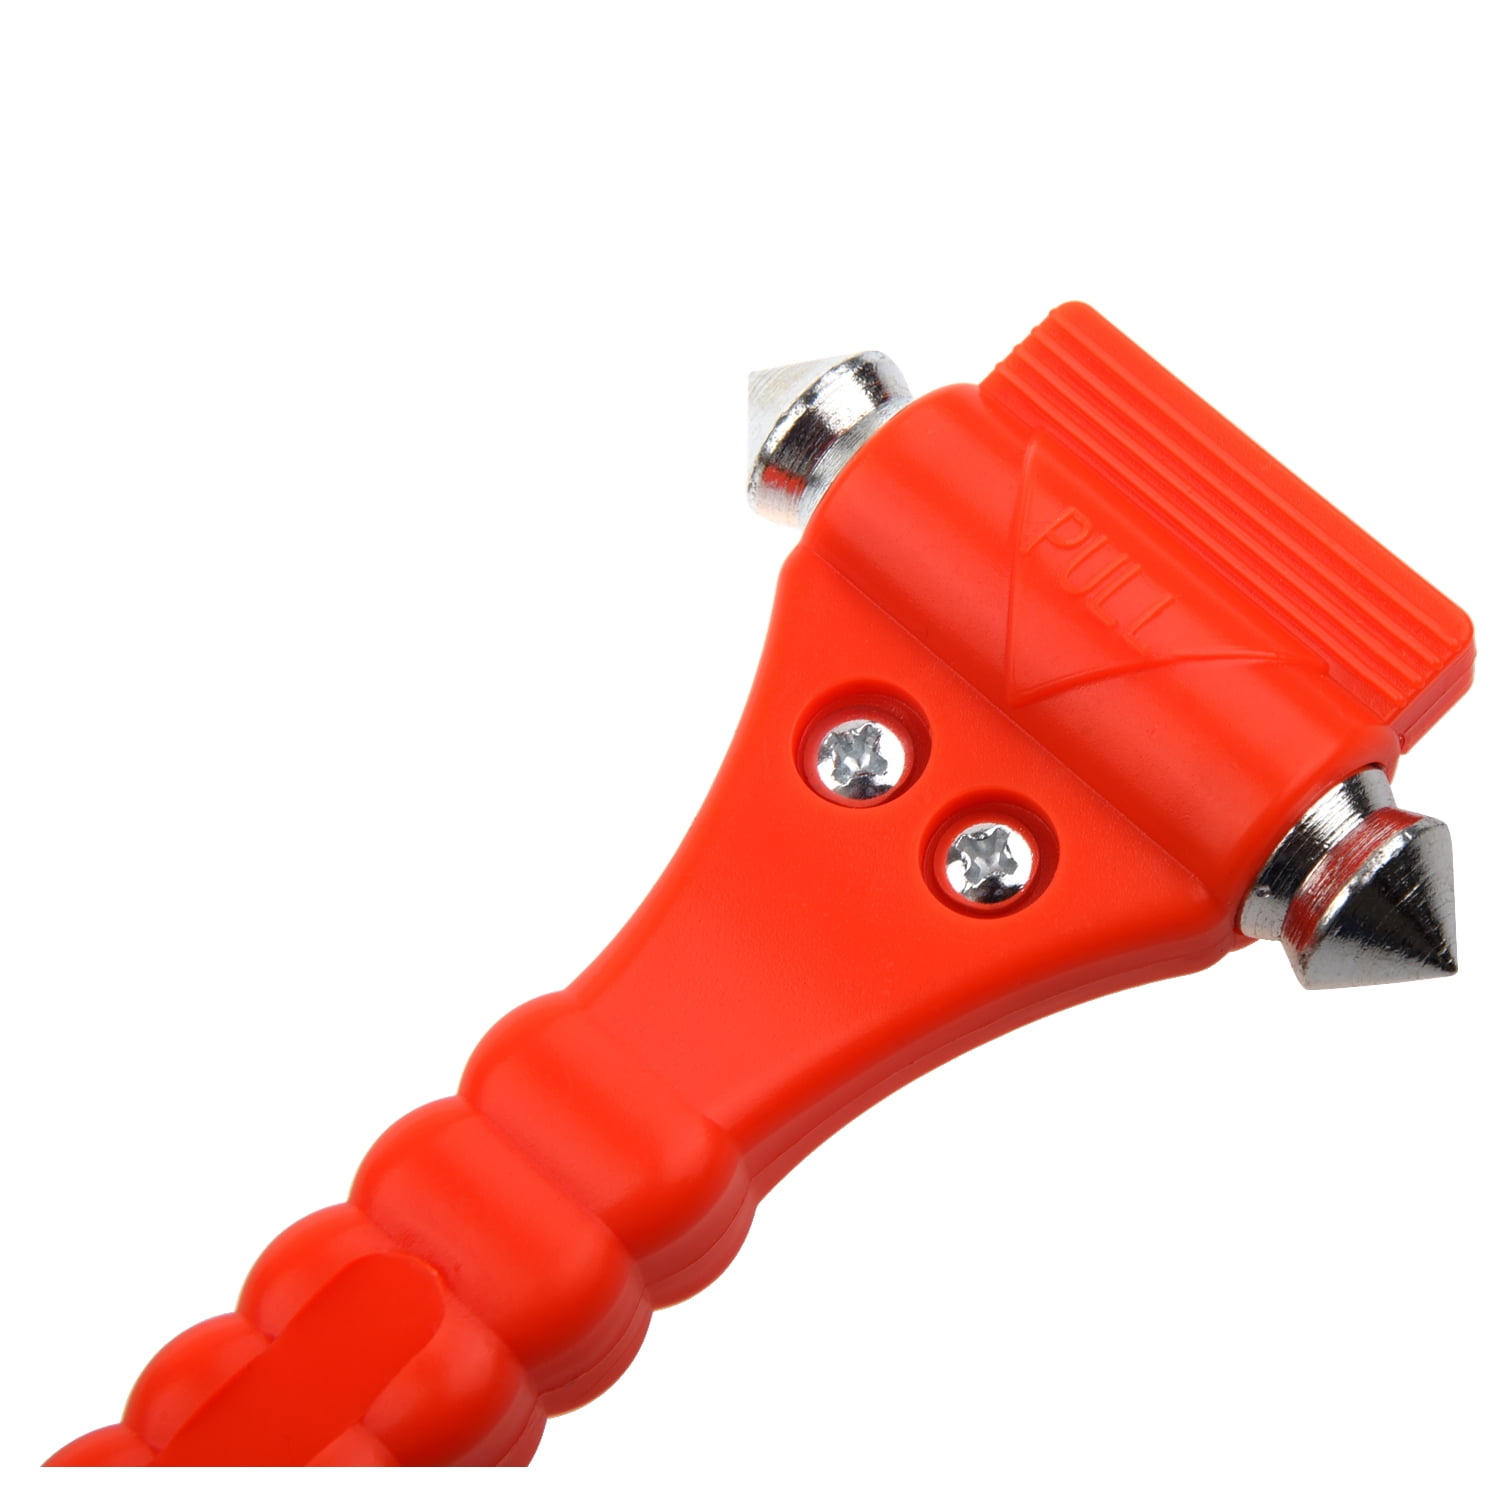 Ready America 75403 Auto Emergency Hammer and Seat Belt Cutter